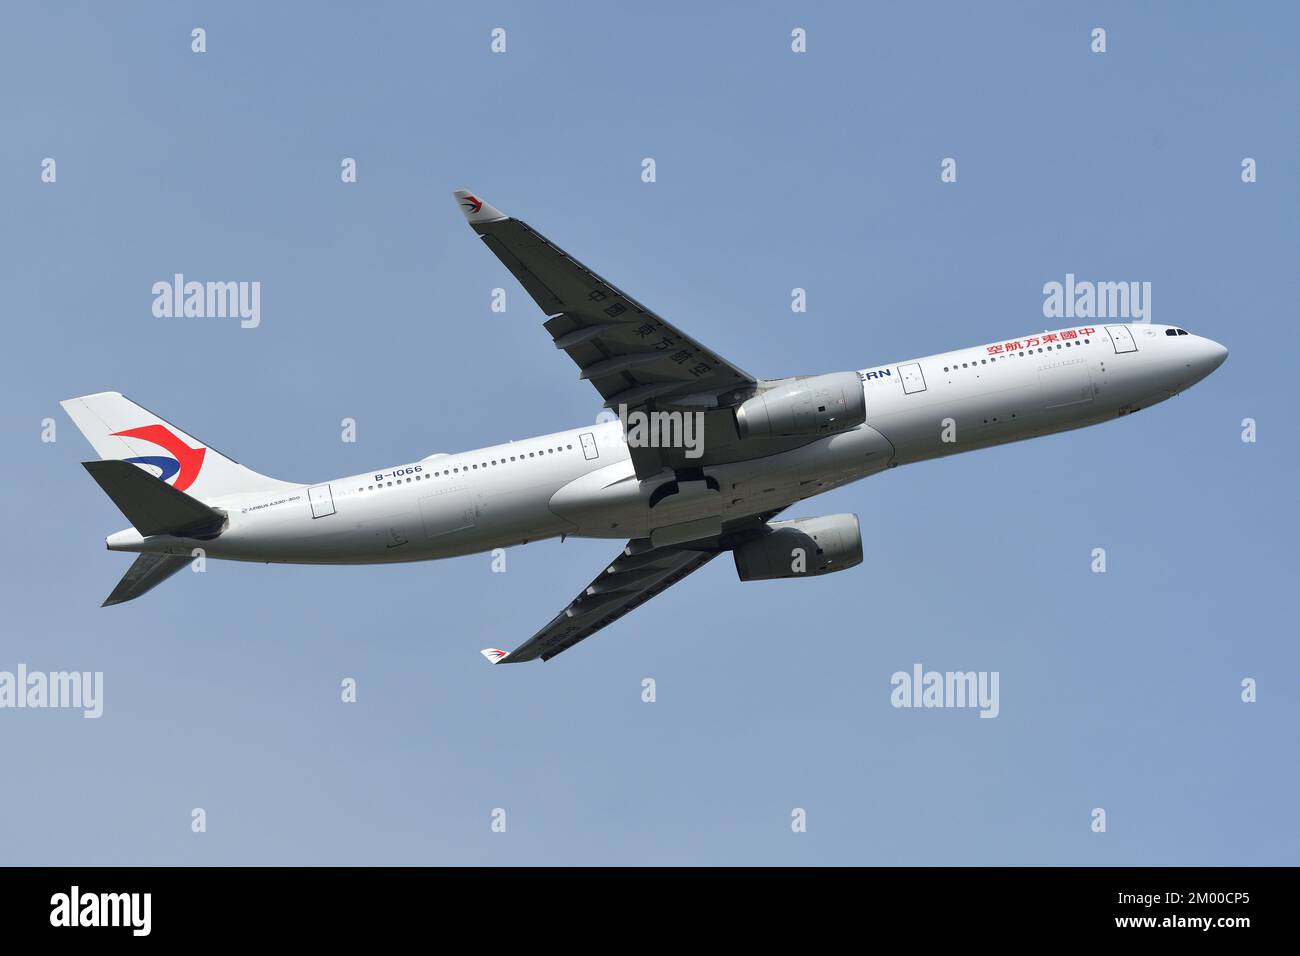 Chiba Prefecture, Japan - May 05, 2019: China Eastern Airlines Airbus A330-300 (B-1066) passenger plane. Stock Photo